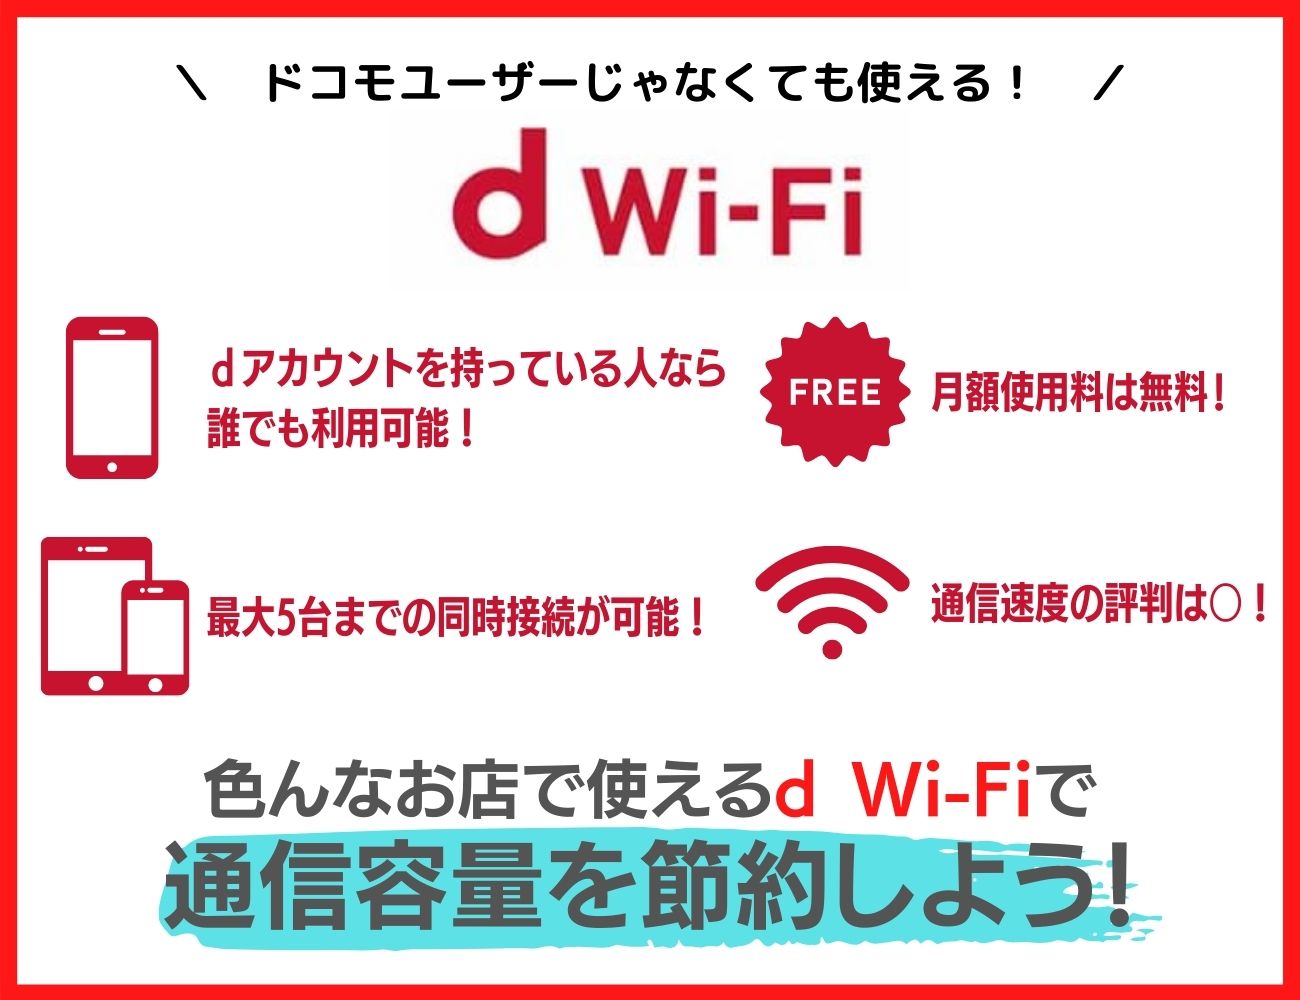 d Wi-Fiを有効活用して通信容量を節約しよう！